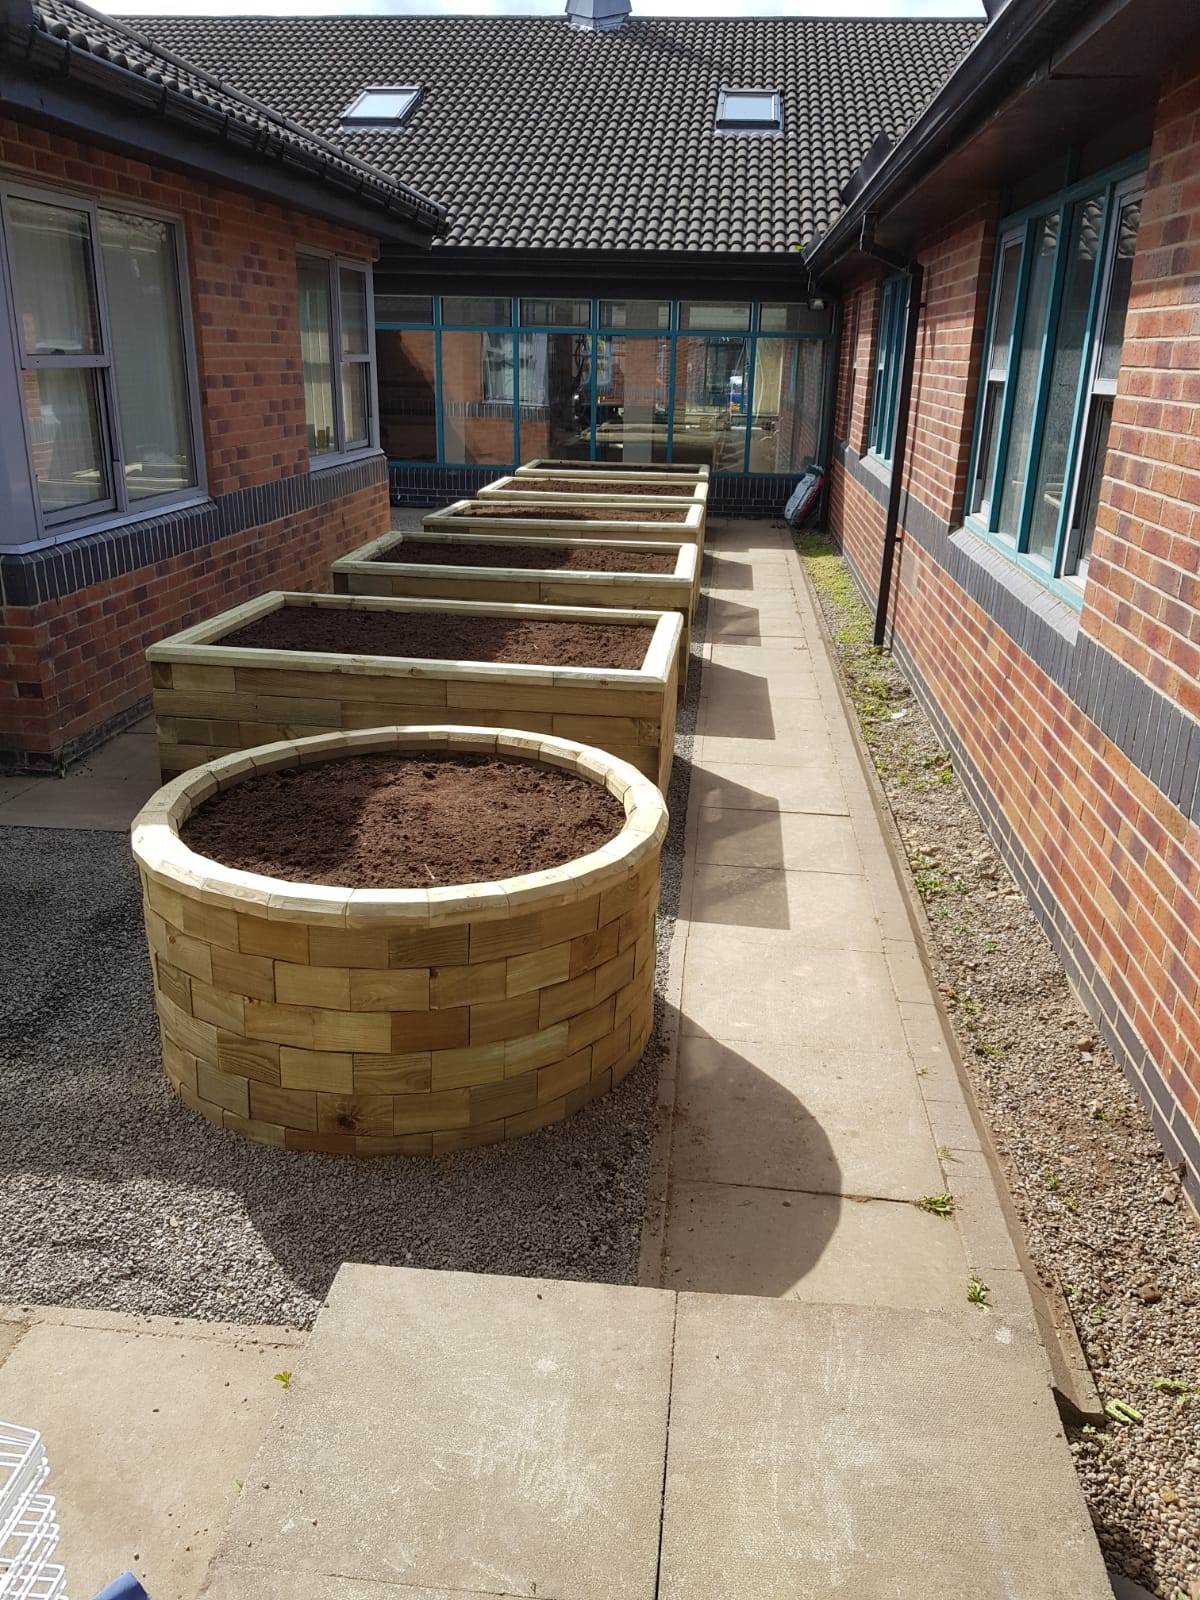 sunderland-council-landscaping-project-nursery-primary-school-raised-wooden-flower-beds